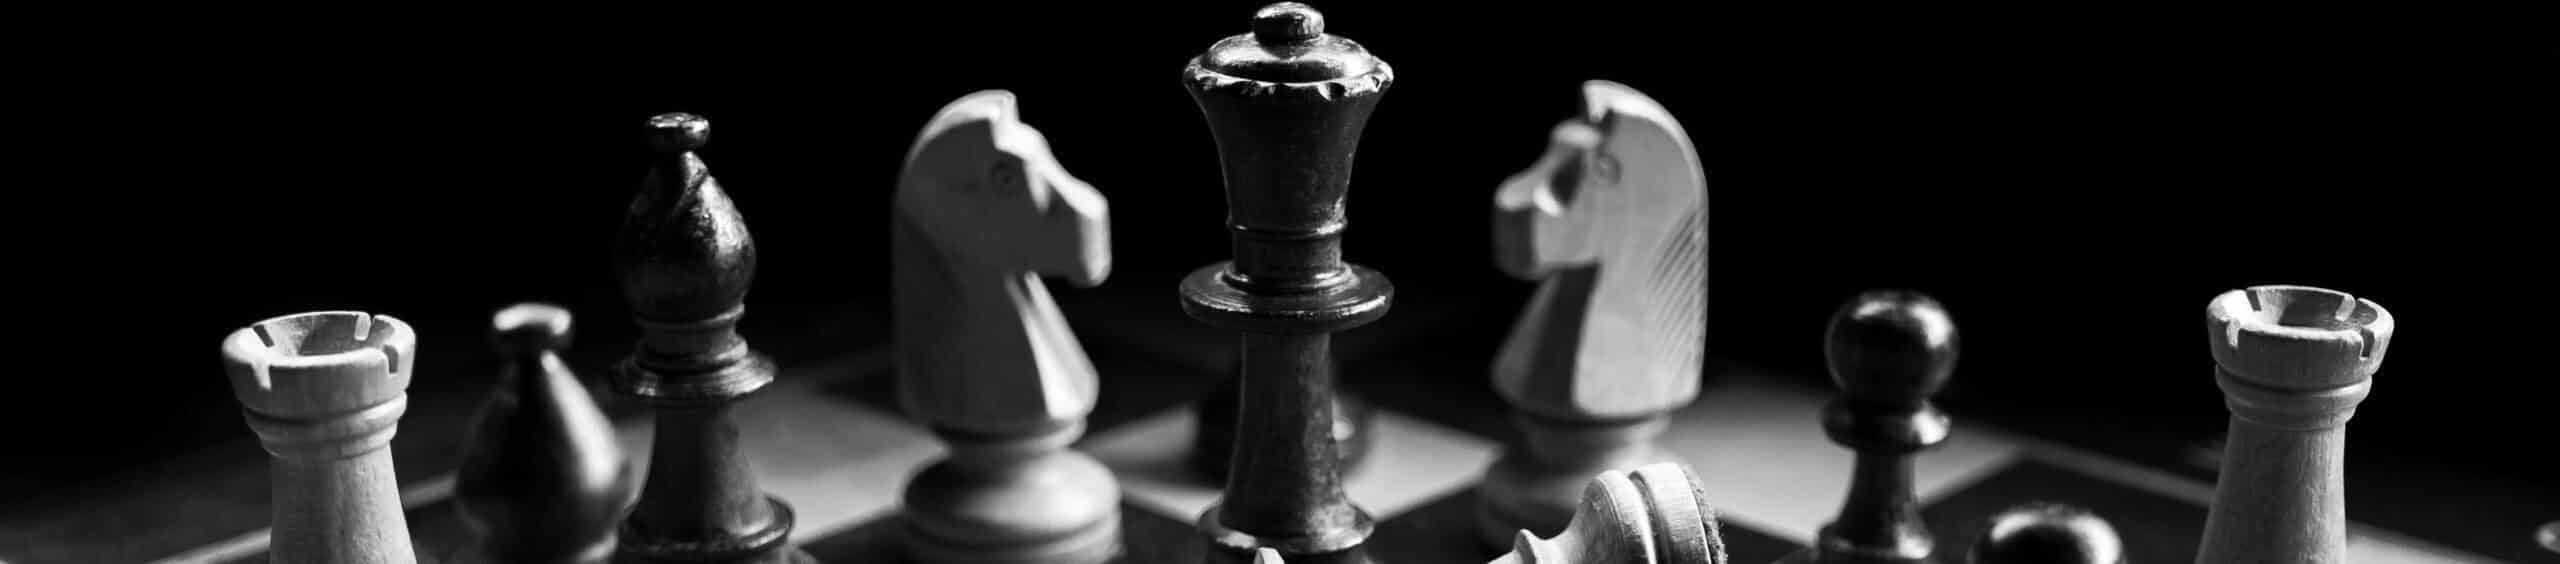 A black and white photo of a chess set.